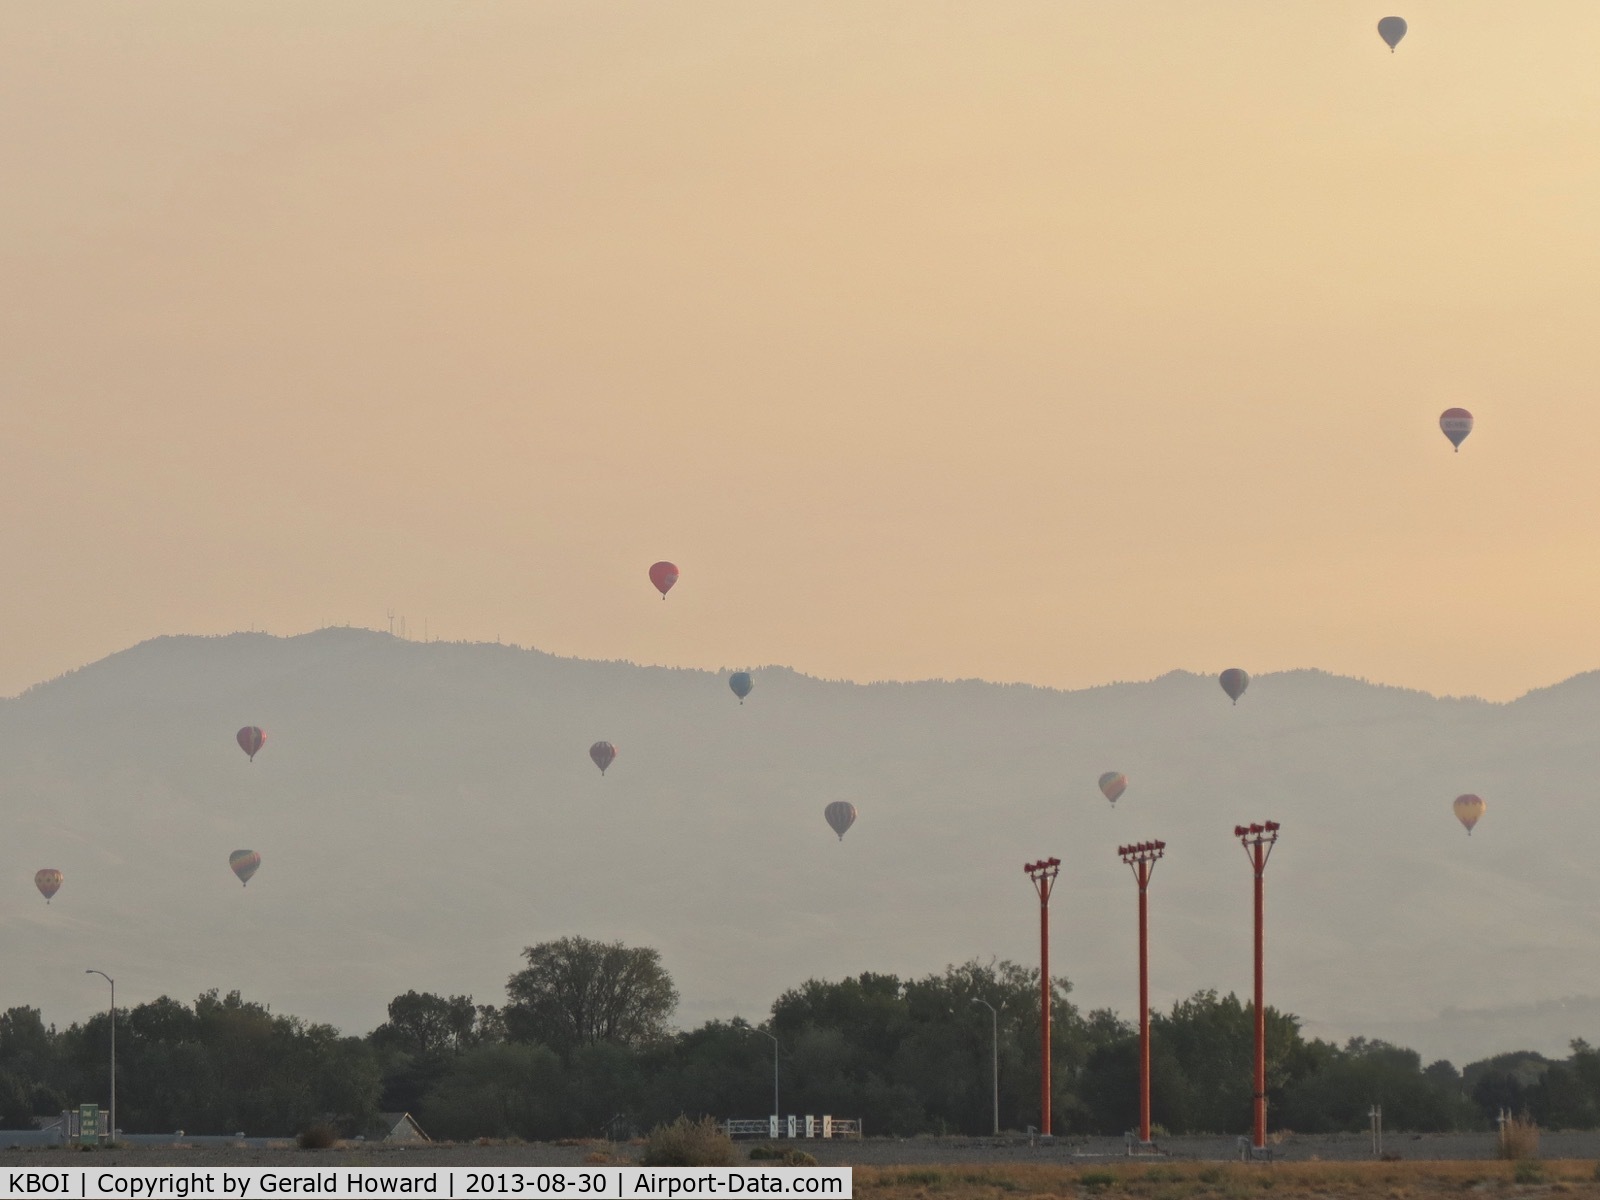 Boise Air Terminal/gowen Fld Airport (BOI) - Smoke didn't stop the balloons from flying.